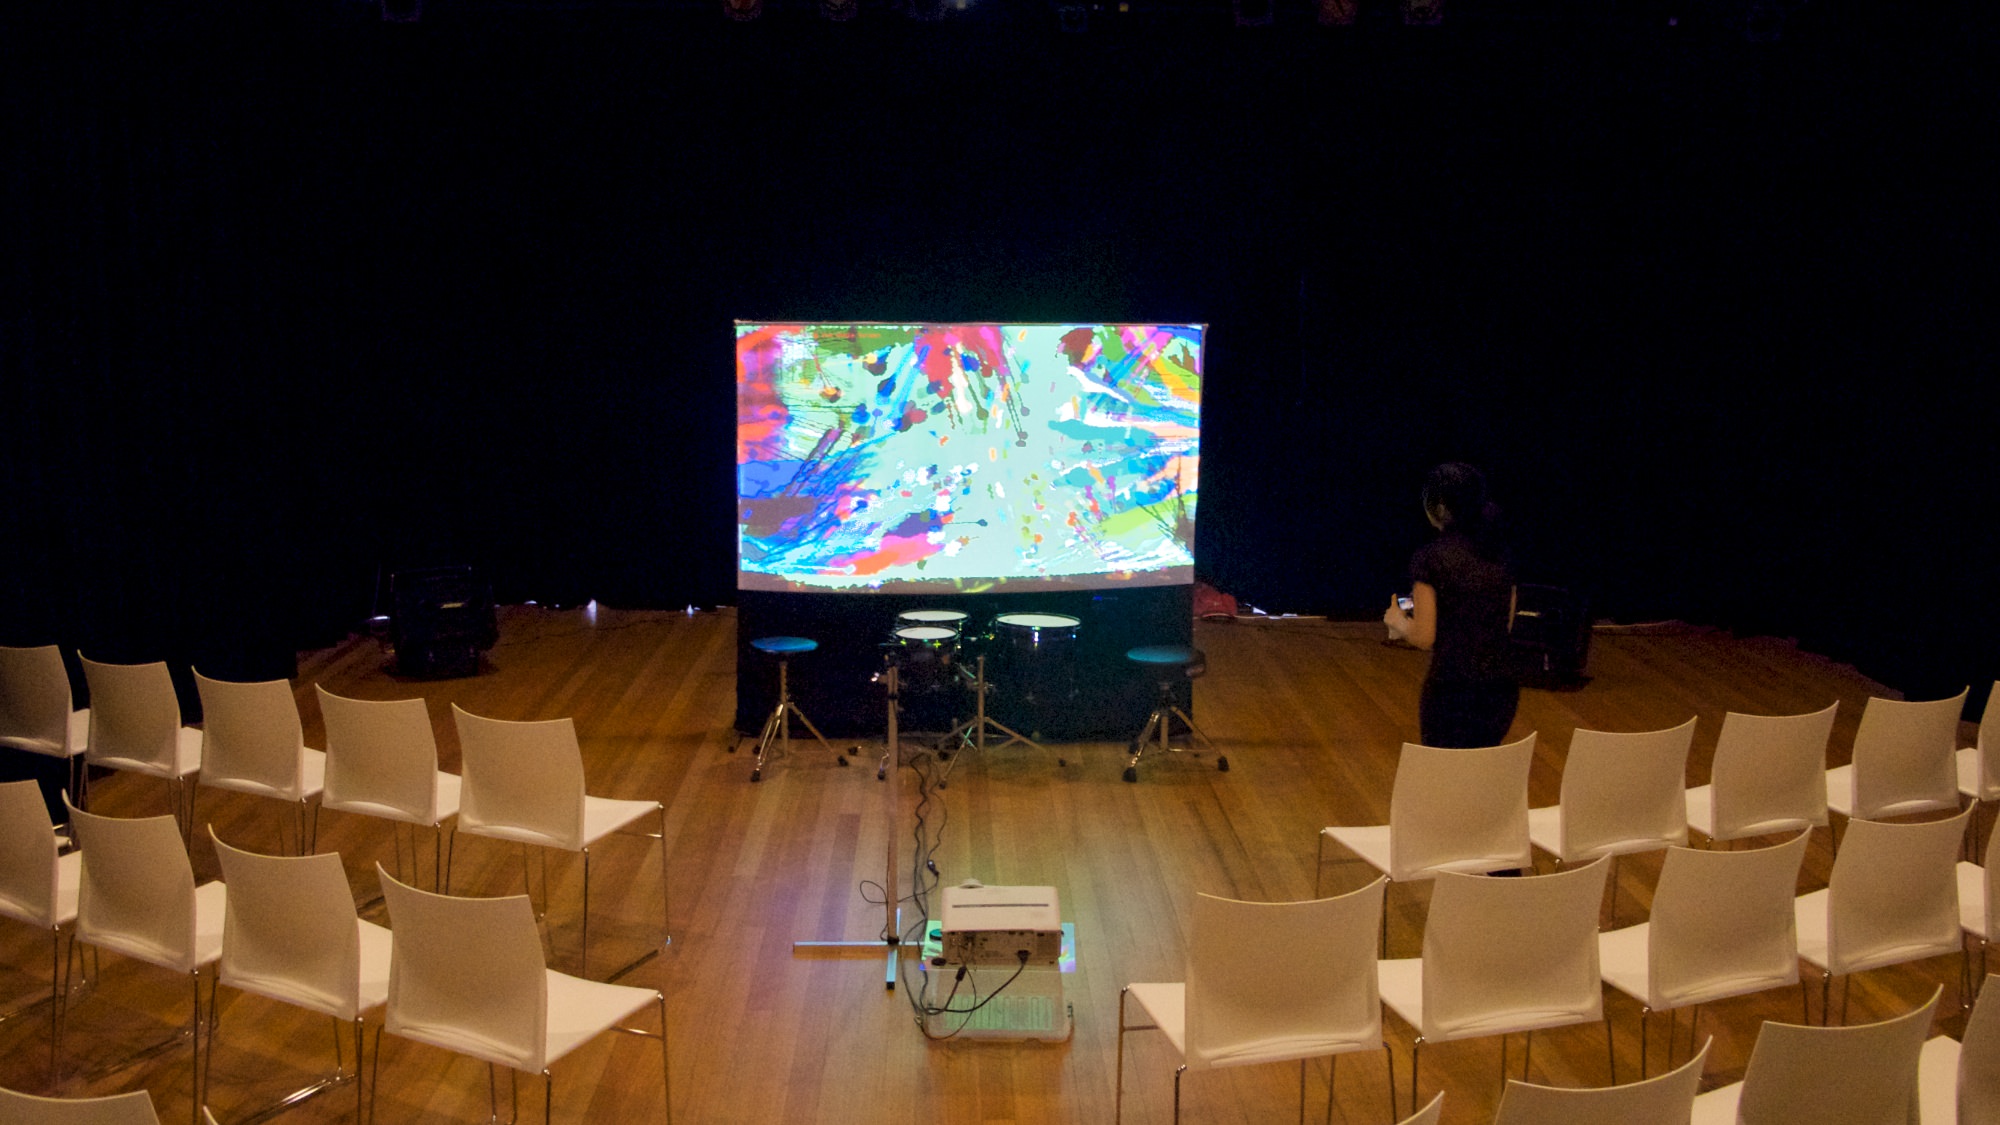 The stage setup for Strike on Stage at Belconnen Arts Centre, Canberra.